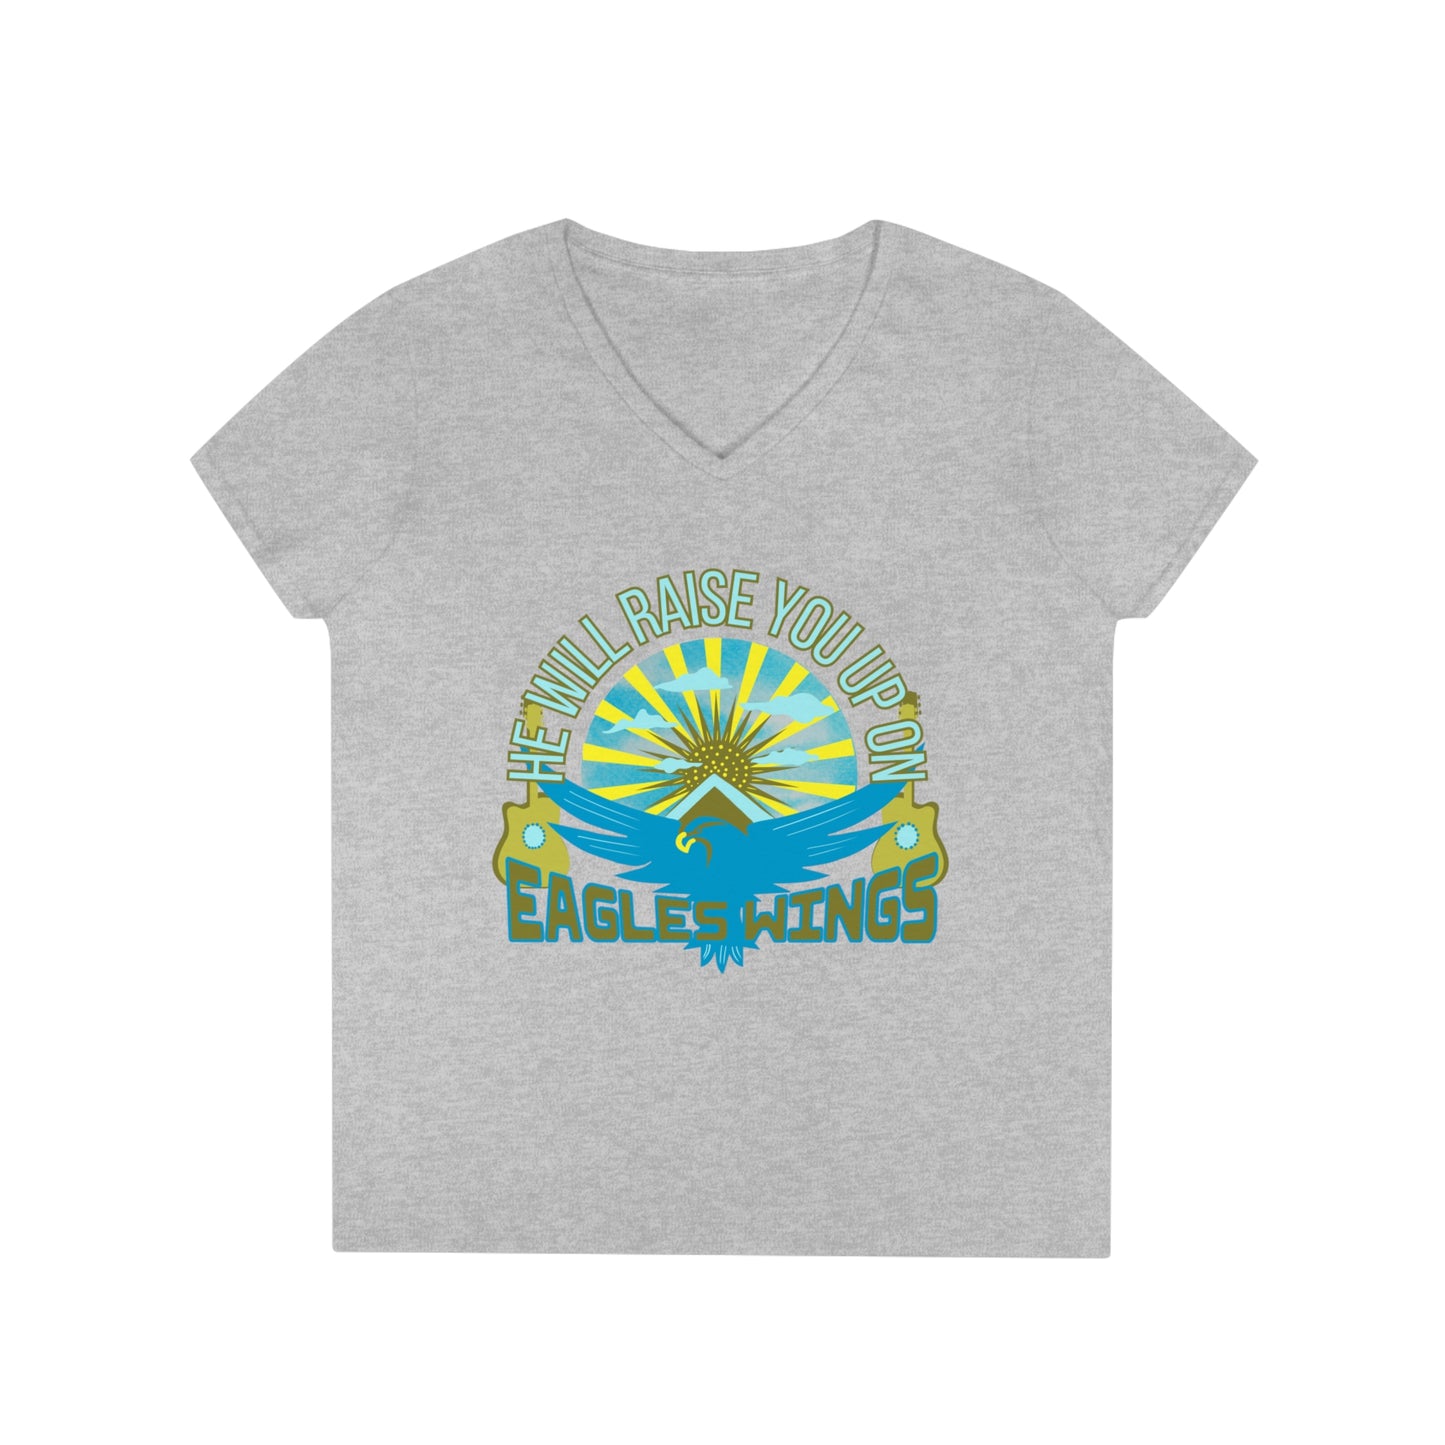 Raise You Up On Eagle's Wings Ladies' V-Neck T-Shirt (Green Pastures Apparel)